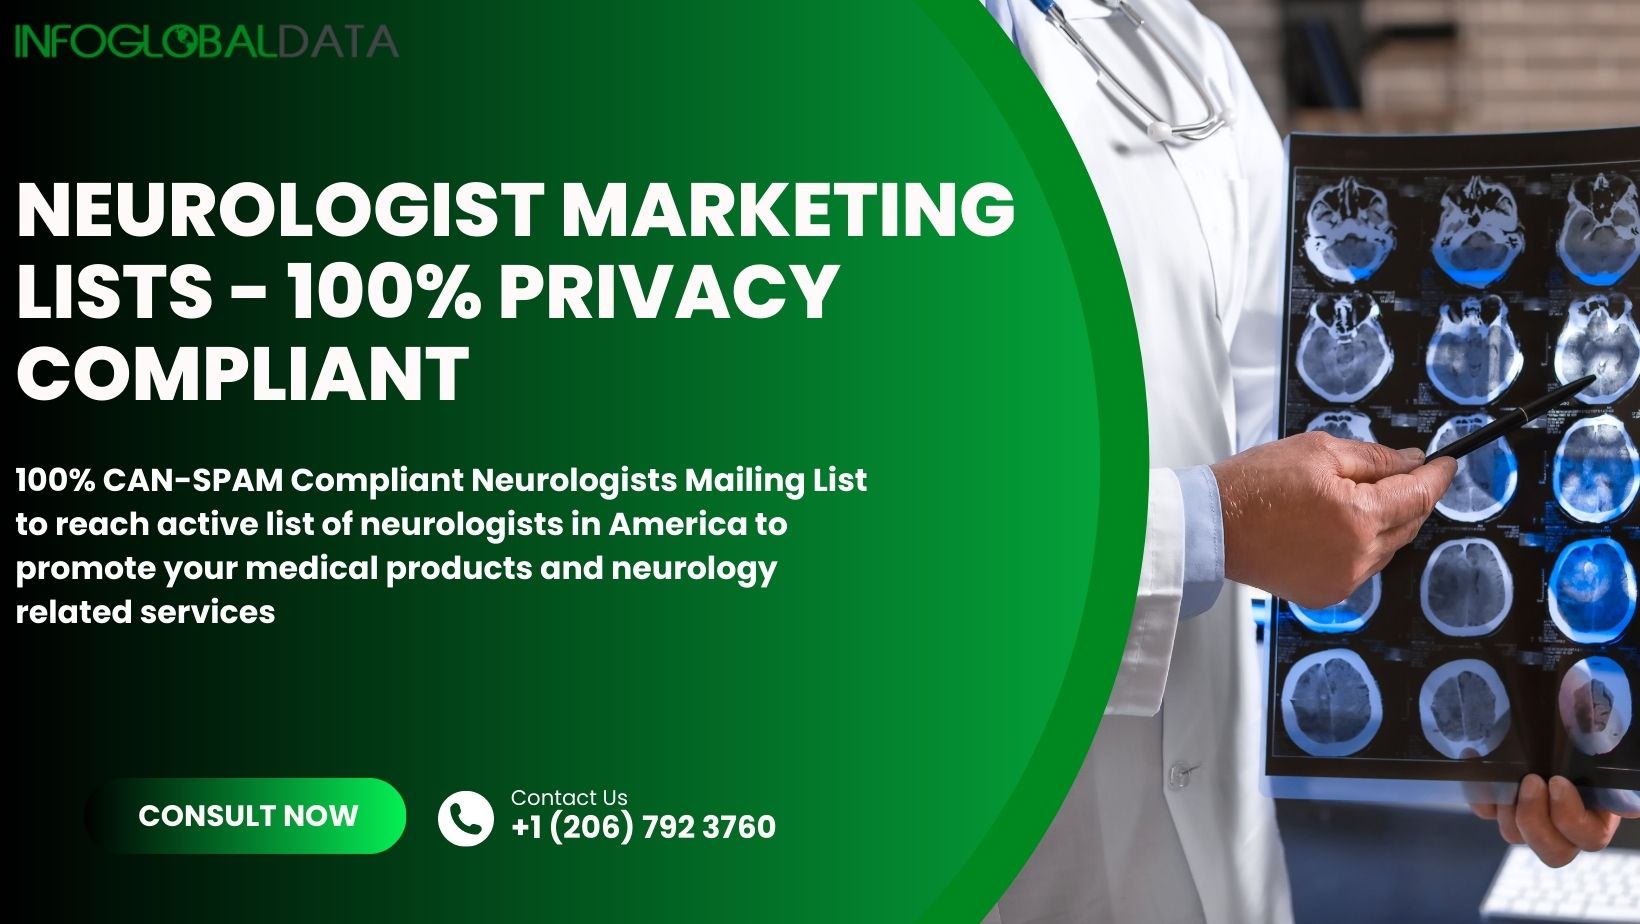 5 Ways to Use a Neurologist Email List for Marketing